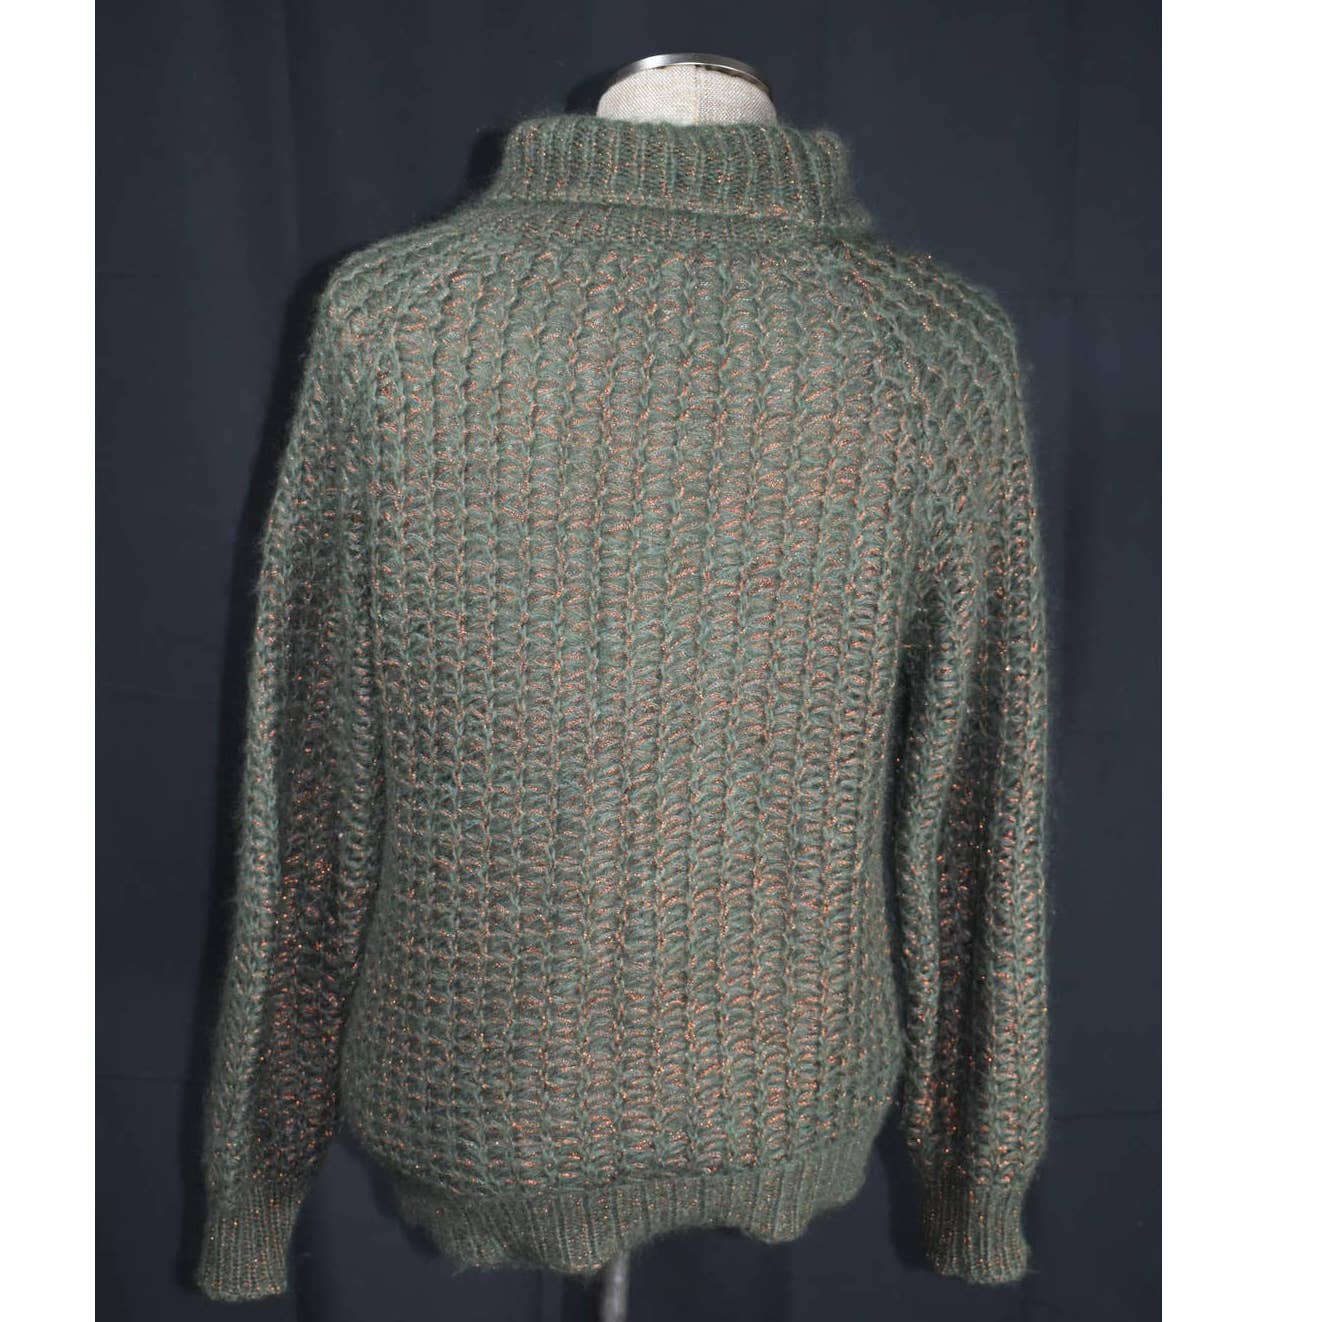 Vintage Theodore Turtleneck Green and Copper Knit Sweater - 42 / Medium